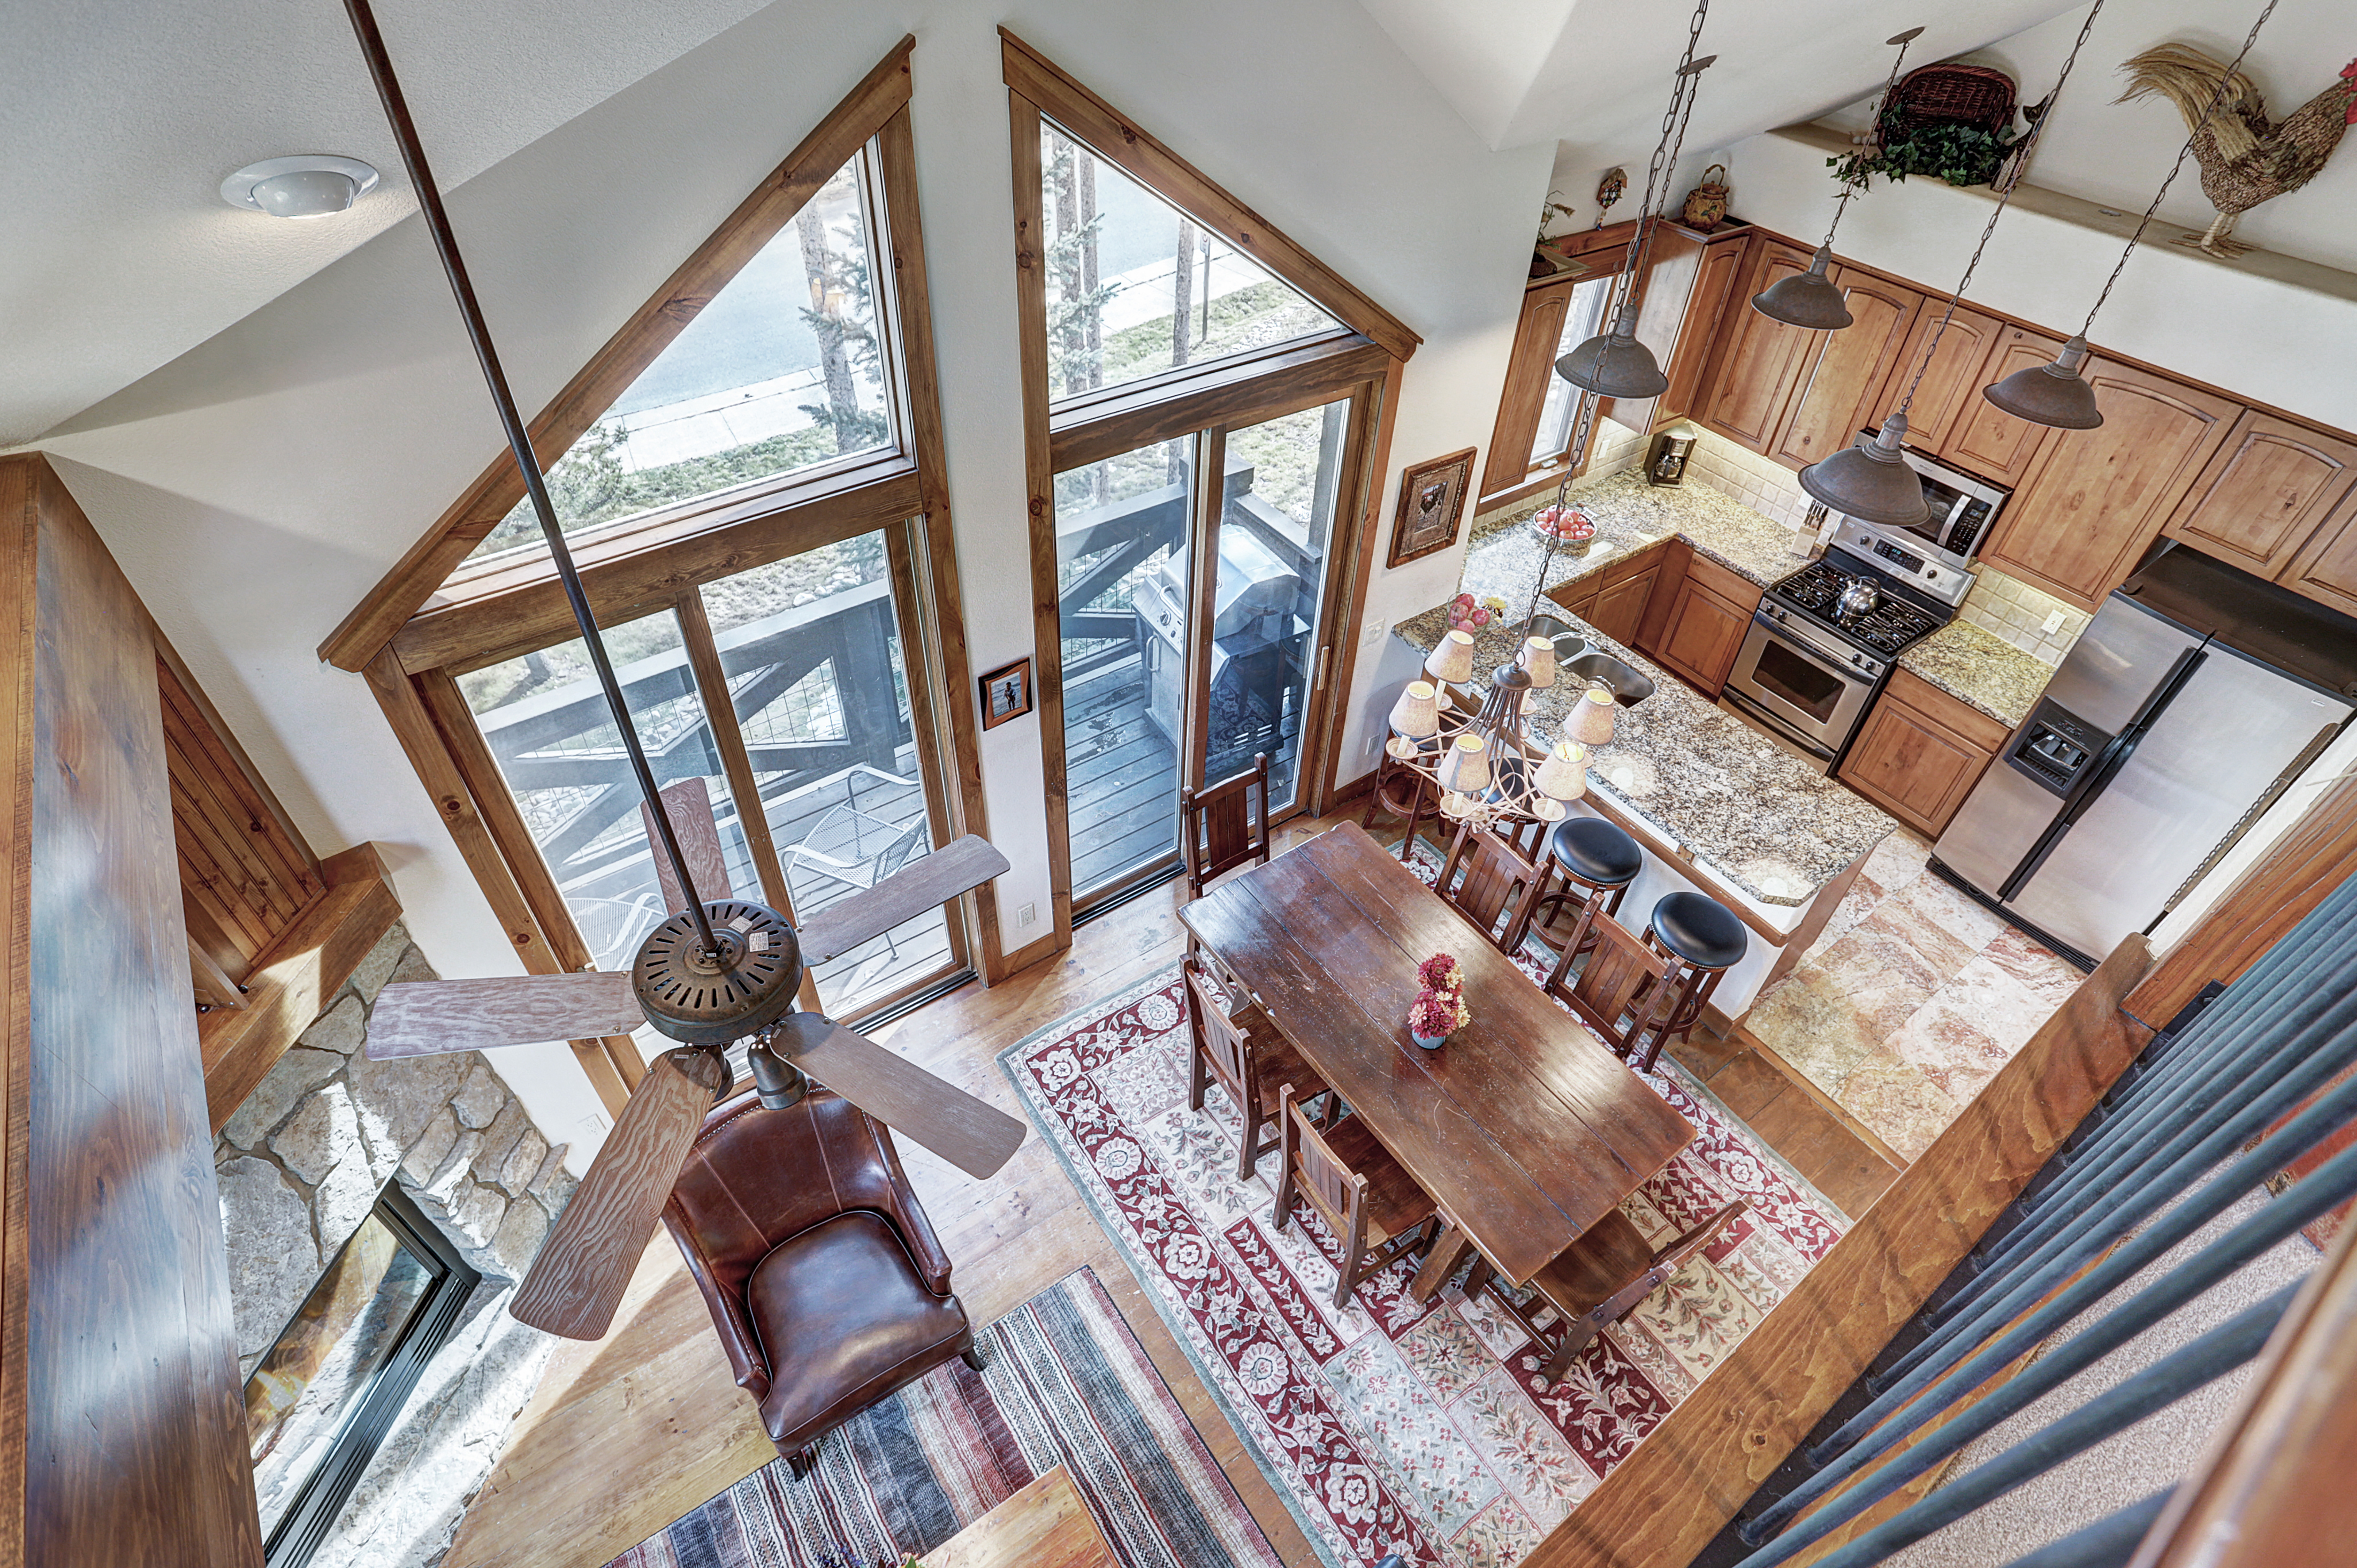 Overhead view of the living, kitchen and dining areas - Amber Sky Breckenridge Vacation Rental